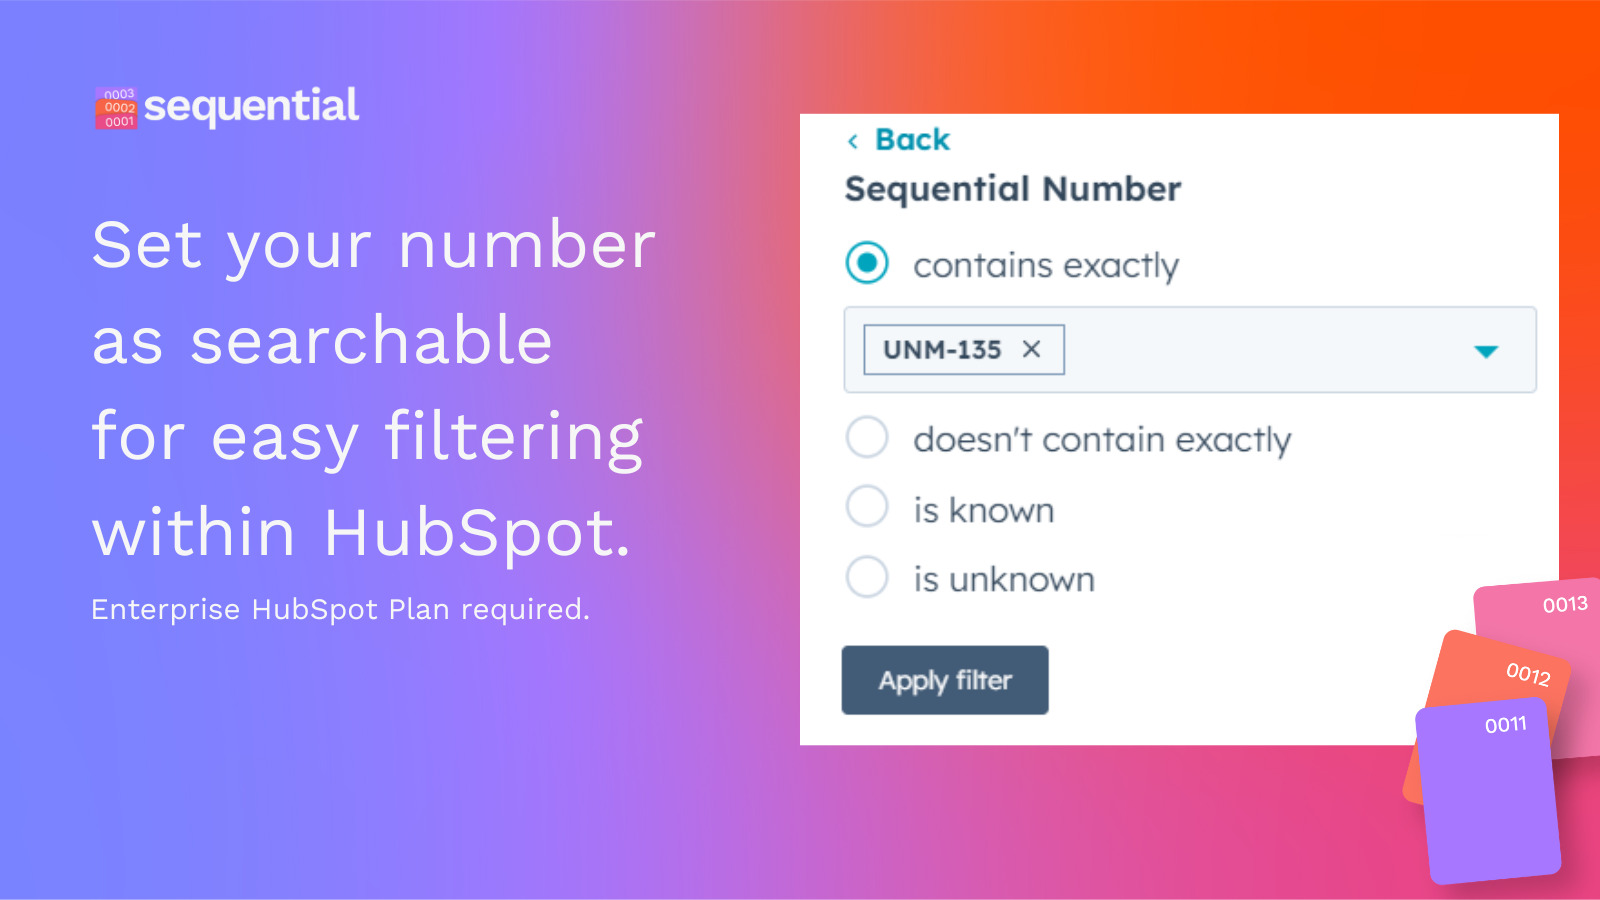 Set your number as searchable for easy filtering within HubSpot.